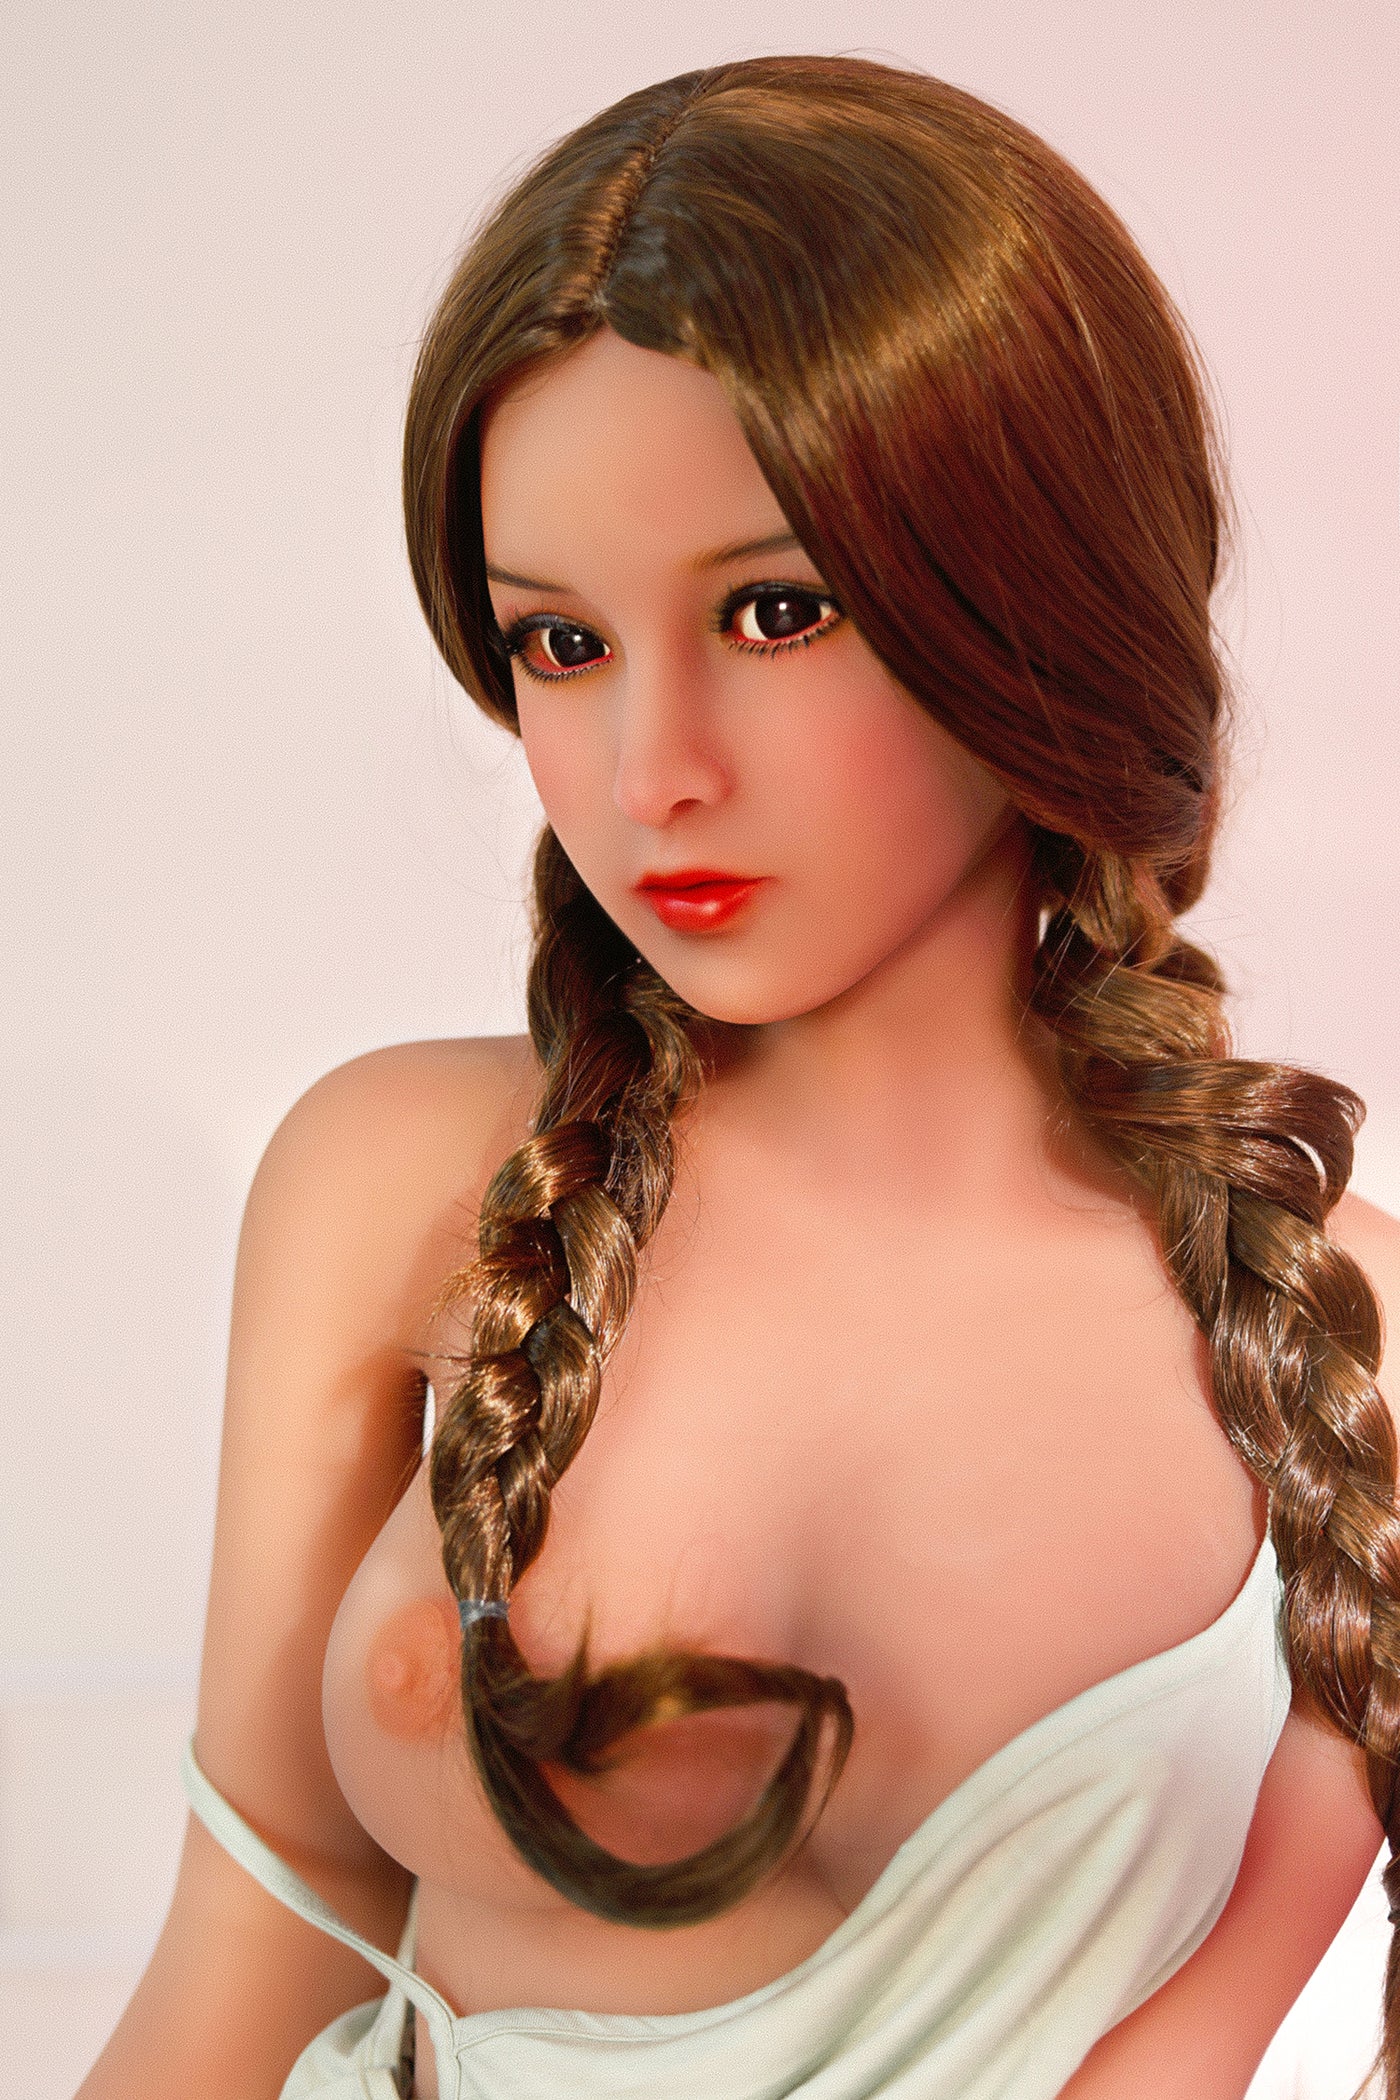 US Stock - SexDollPartner Daphne 148cm Young Looking Realistic Love Doll - 148cm, New Arrivals, Top 10, US Stock - SexDollPartner